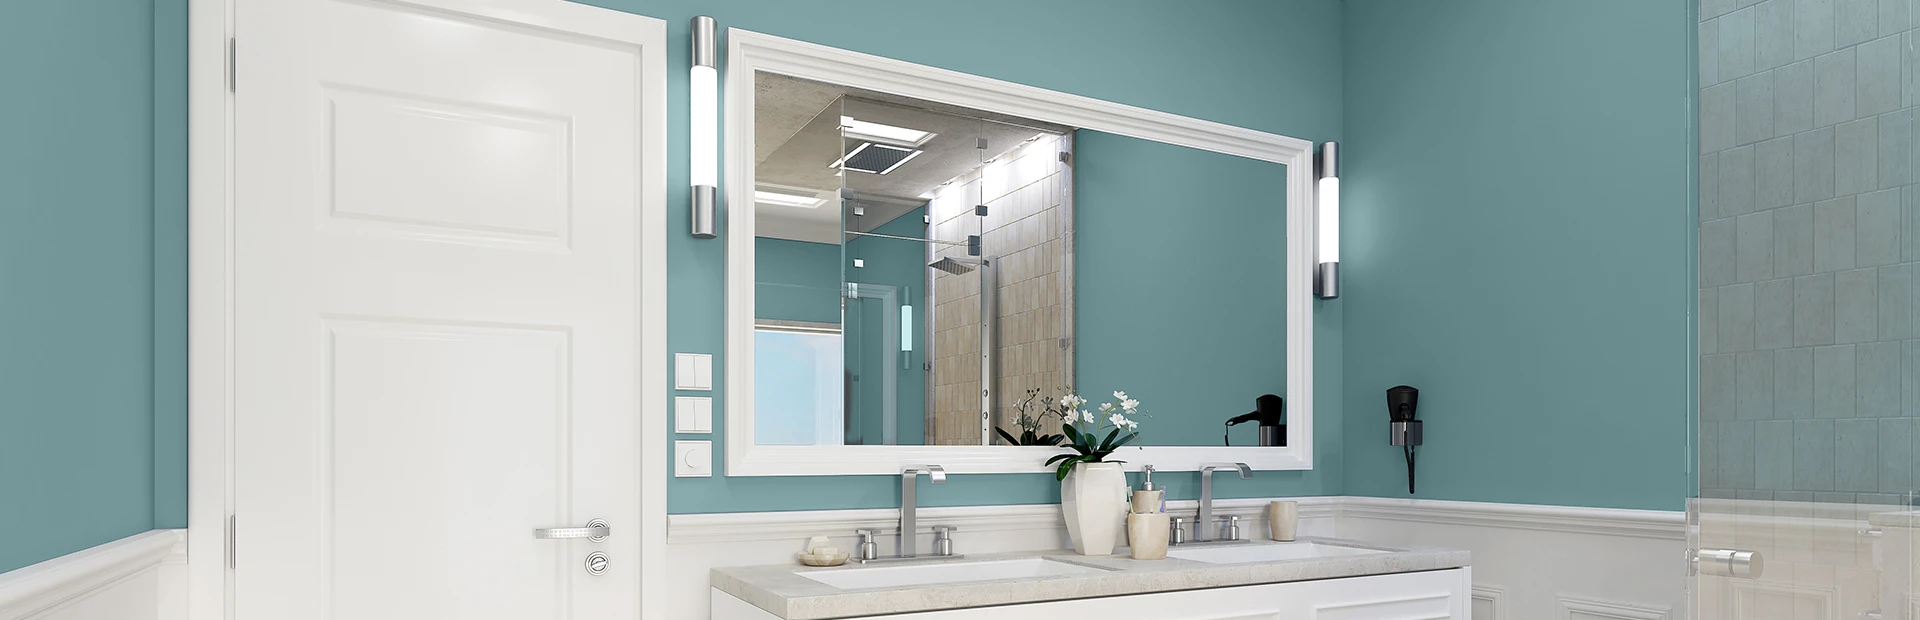 Bathroom in seafoam green, light gray and white walls.